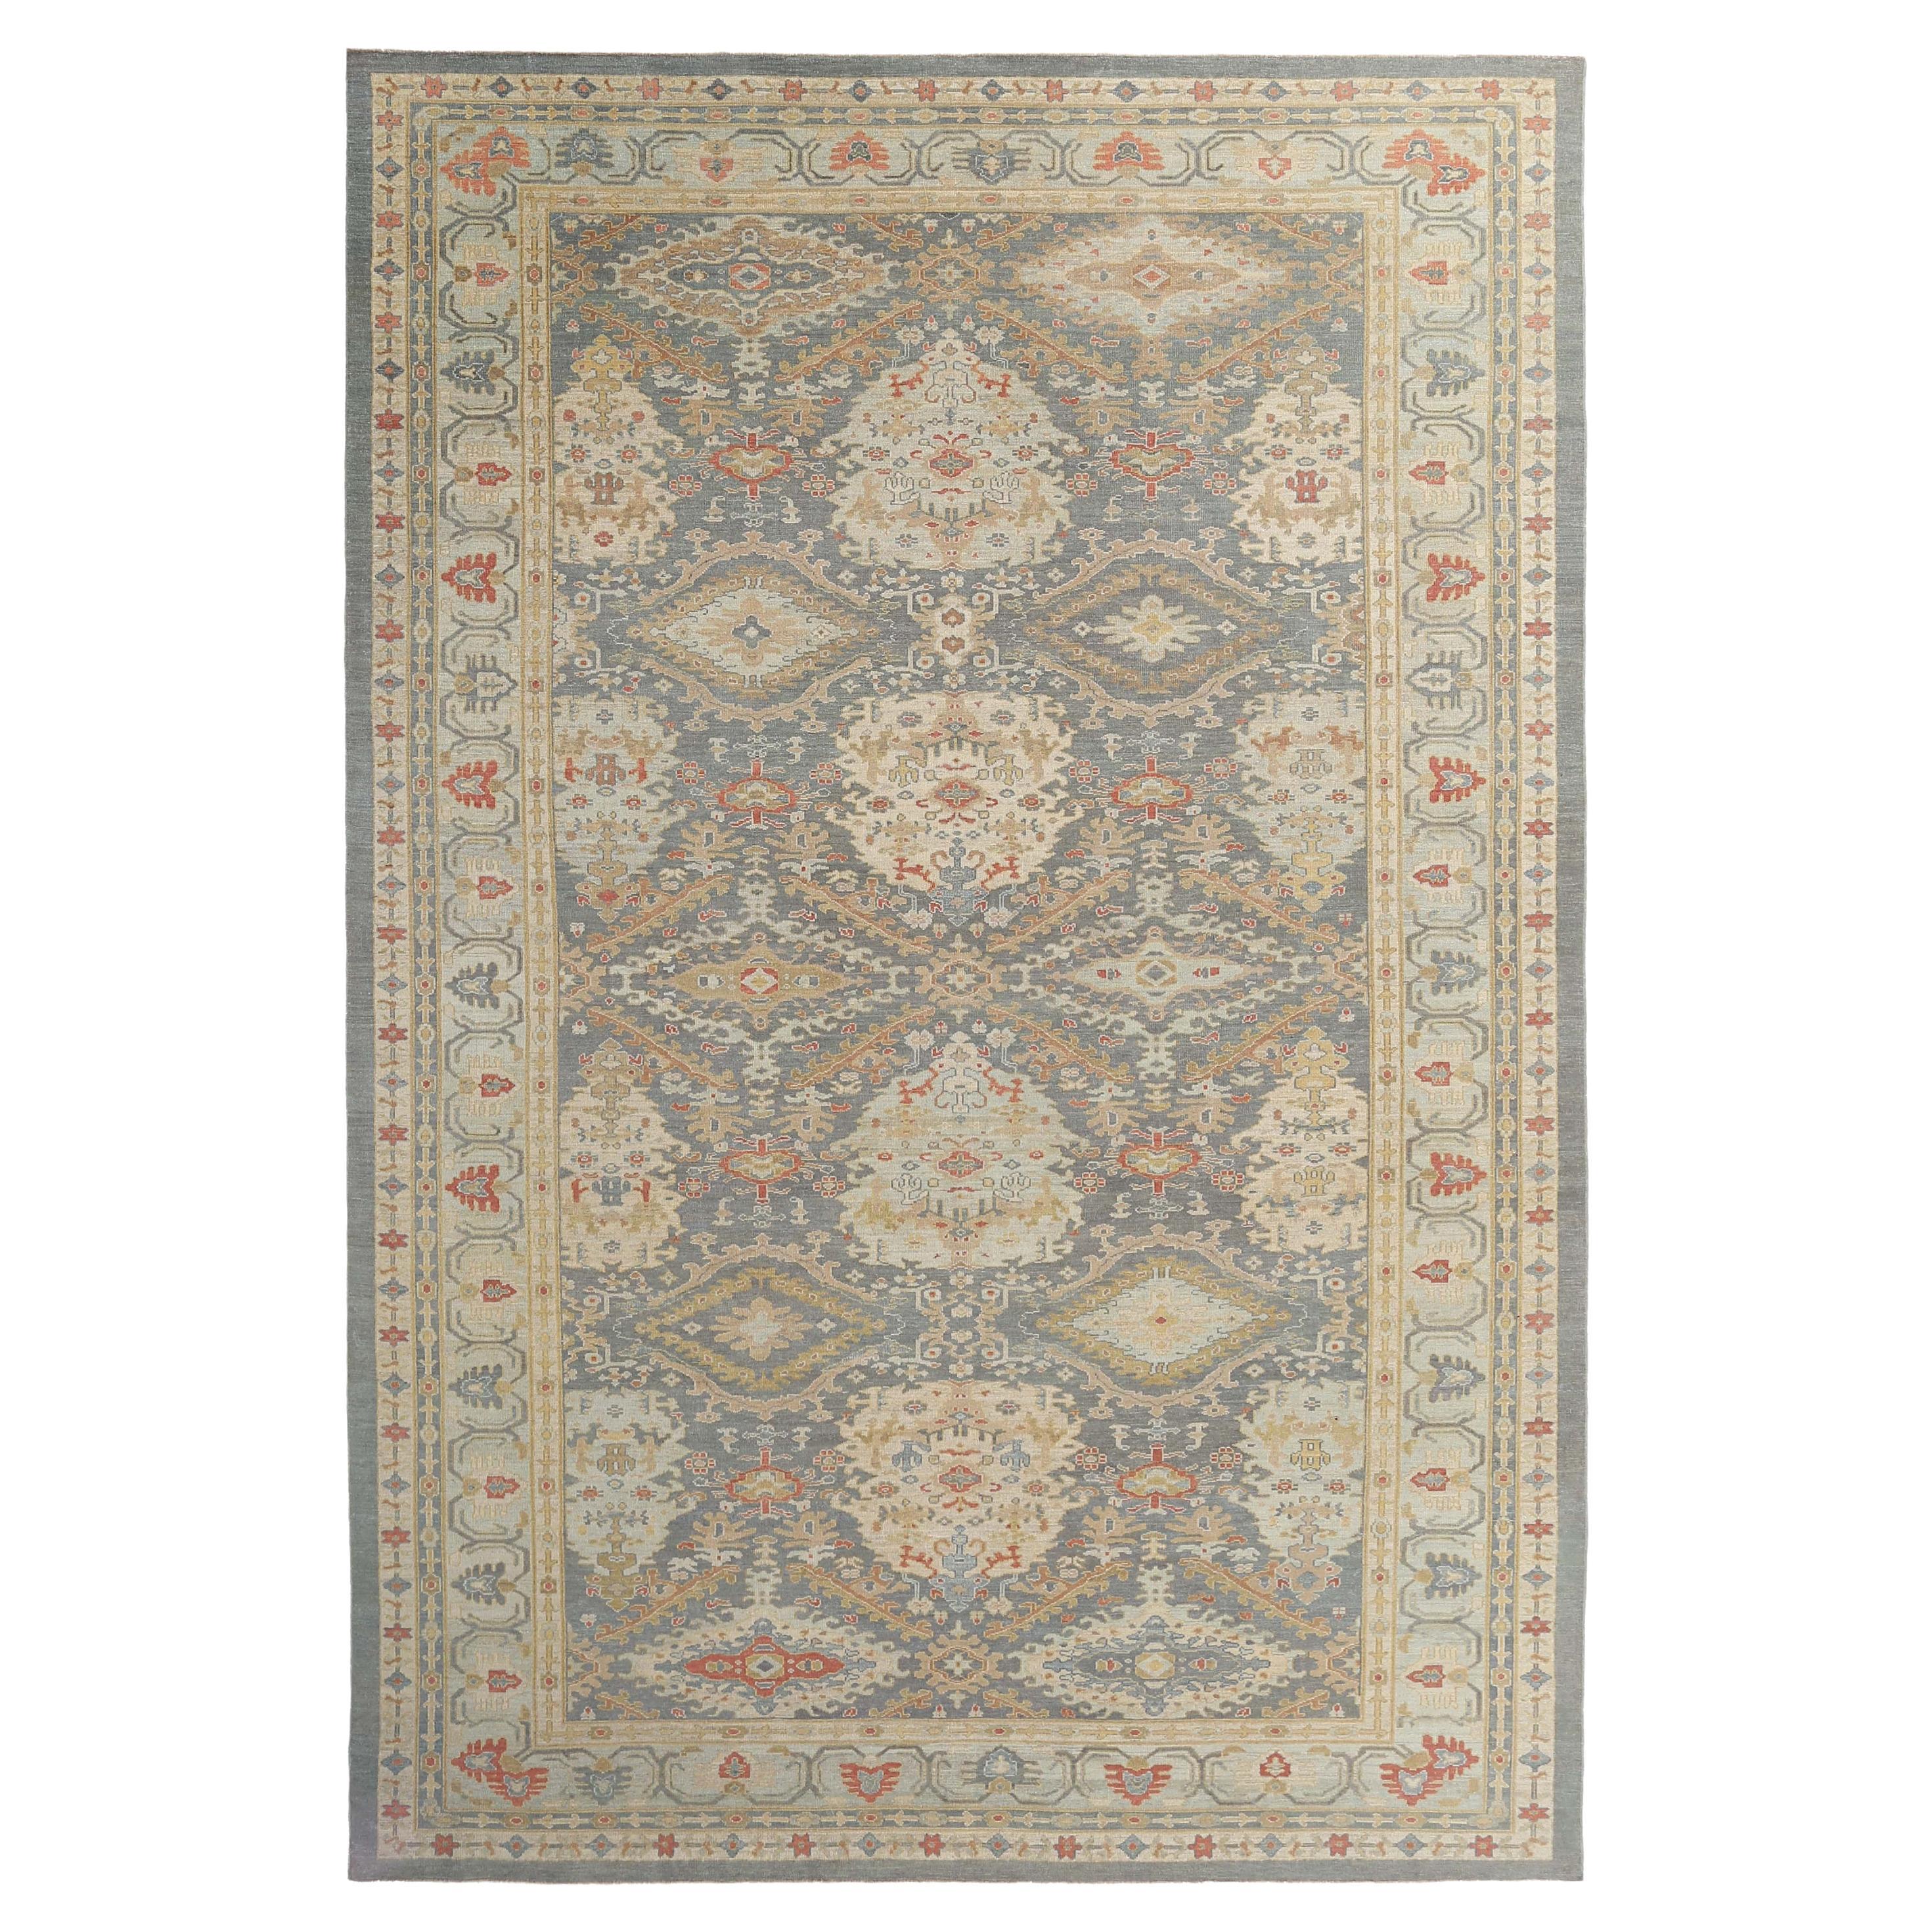 Handmade Turkish Sultanabad Rug in Blue, Red, and Yellow